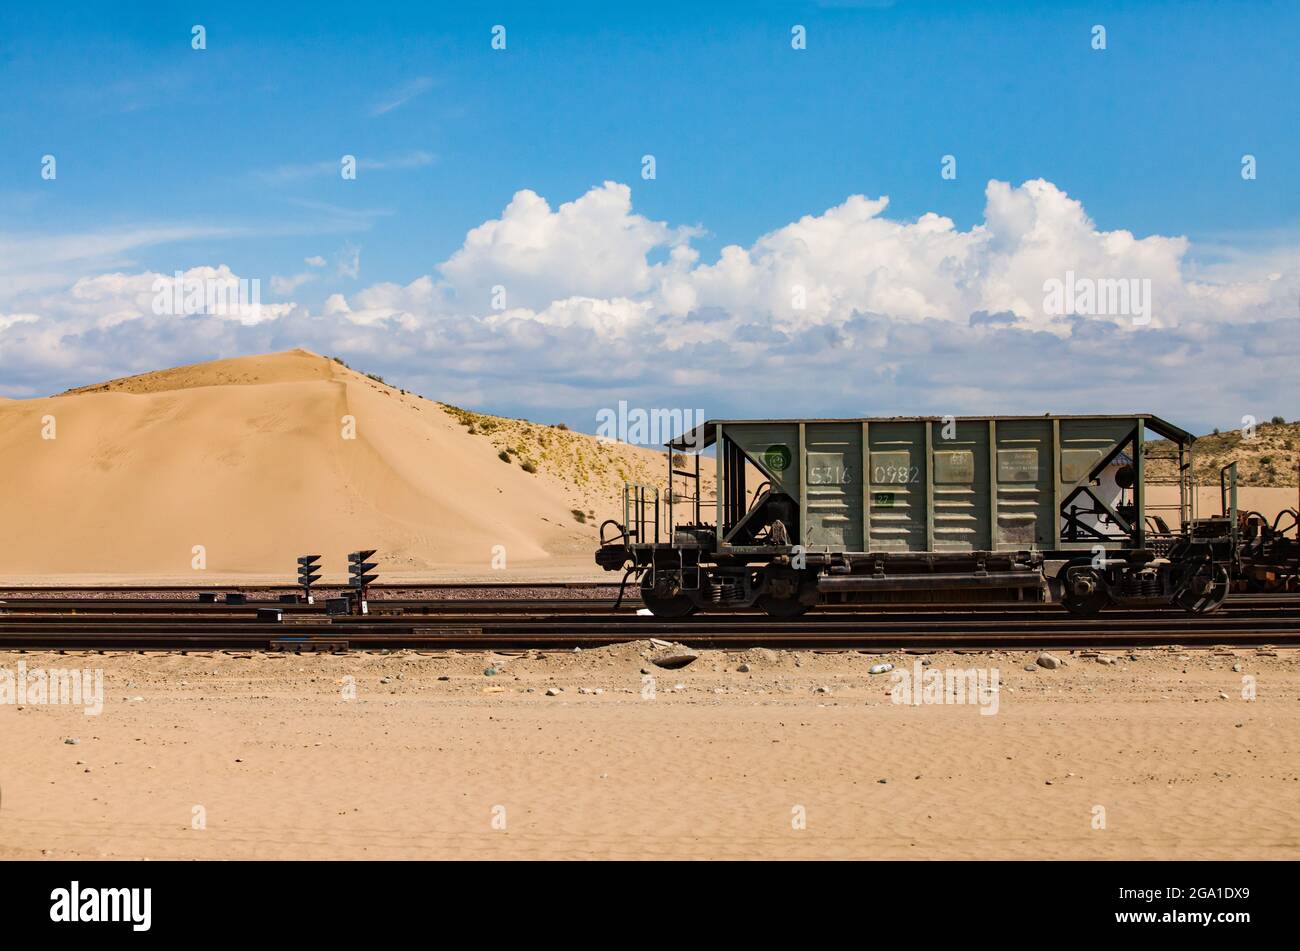 Altynkol, Kazakhstan - June 05, 2012: Railway station Altynkol. Hopper car on yellow sand dune and blue sky with clouds backdrop. Stock Photo